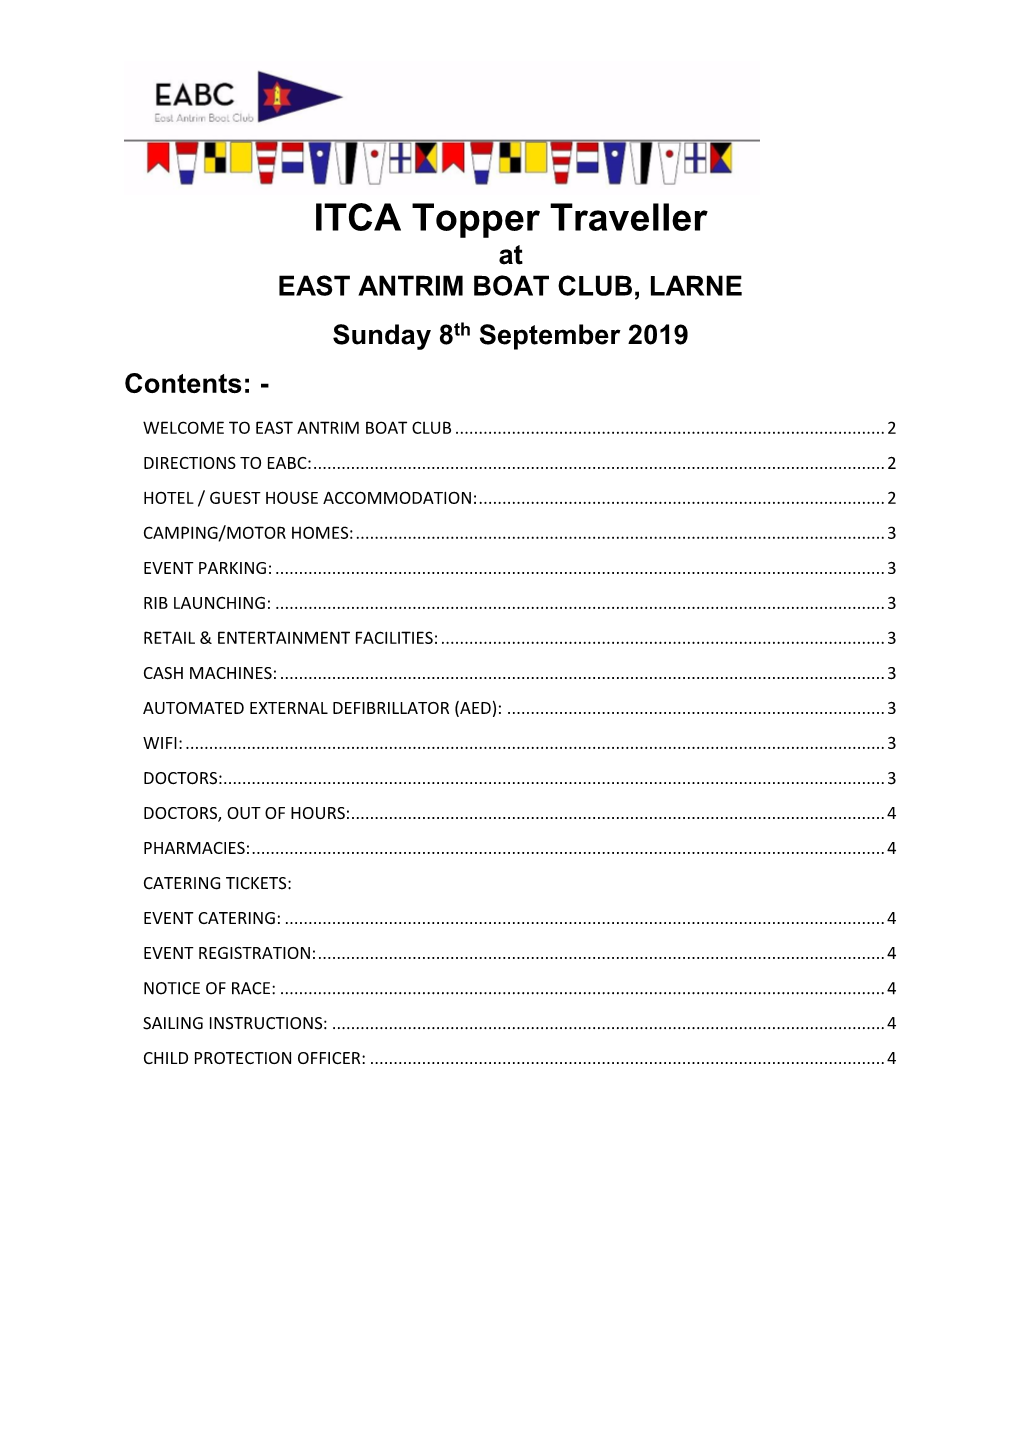 ITCA Topper Traveller at EAST ANTRIM BOAT CLUB, LARNE Sunday 8Th September 2019 Contents: